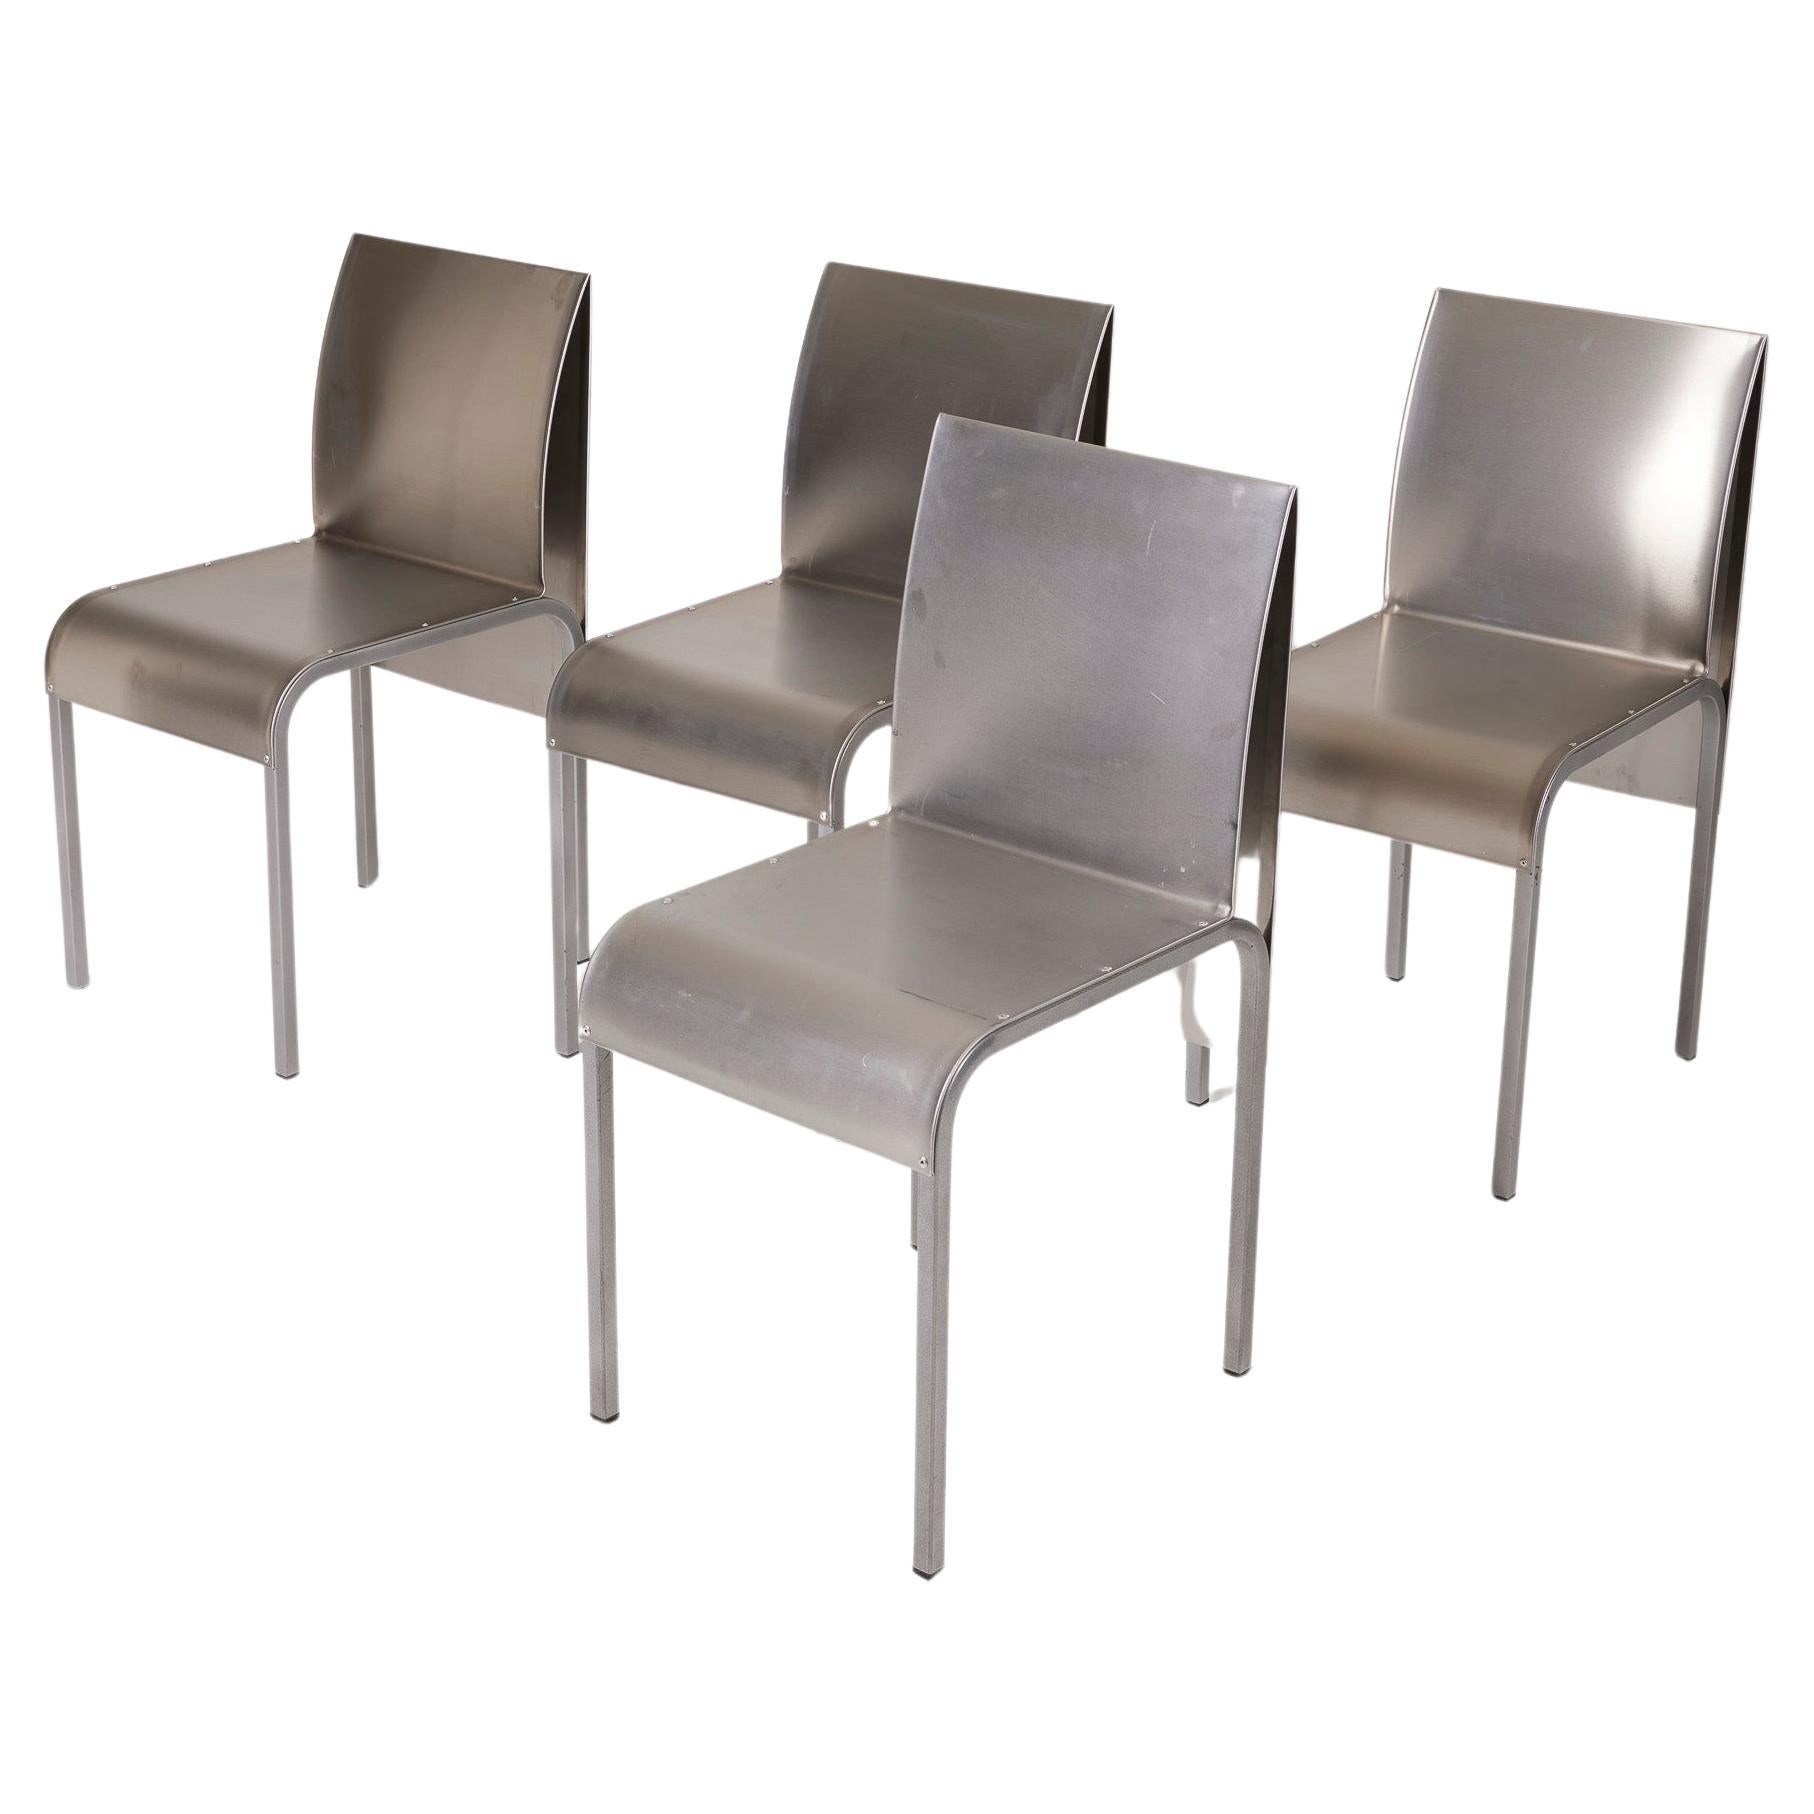 Set of 4 brushed metal chairs